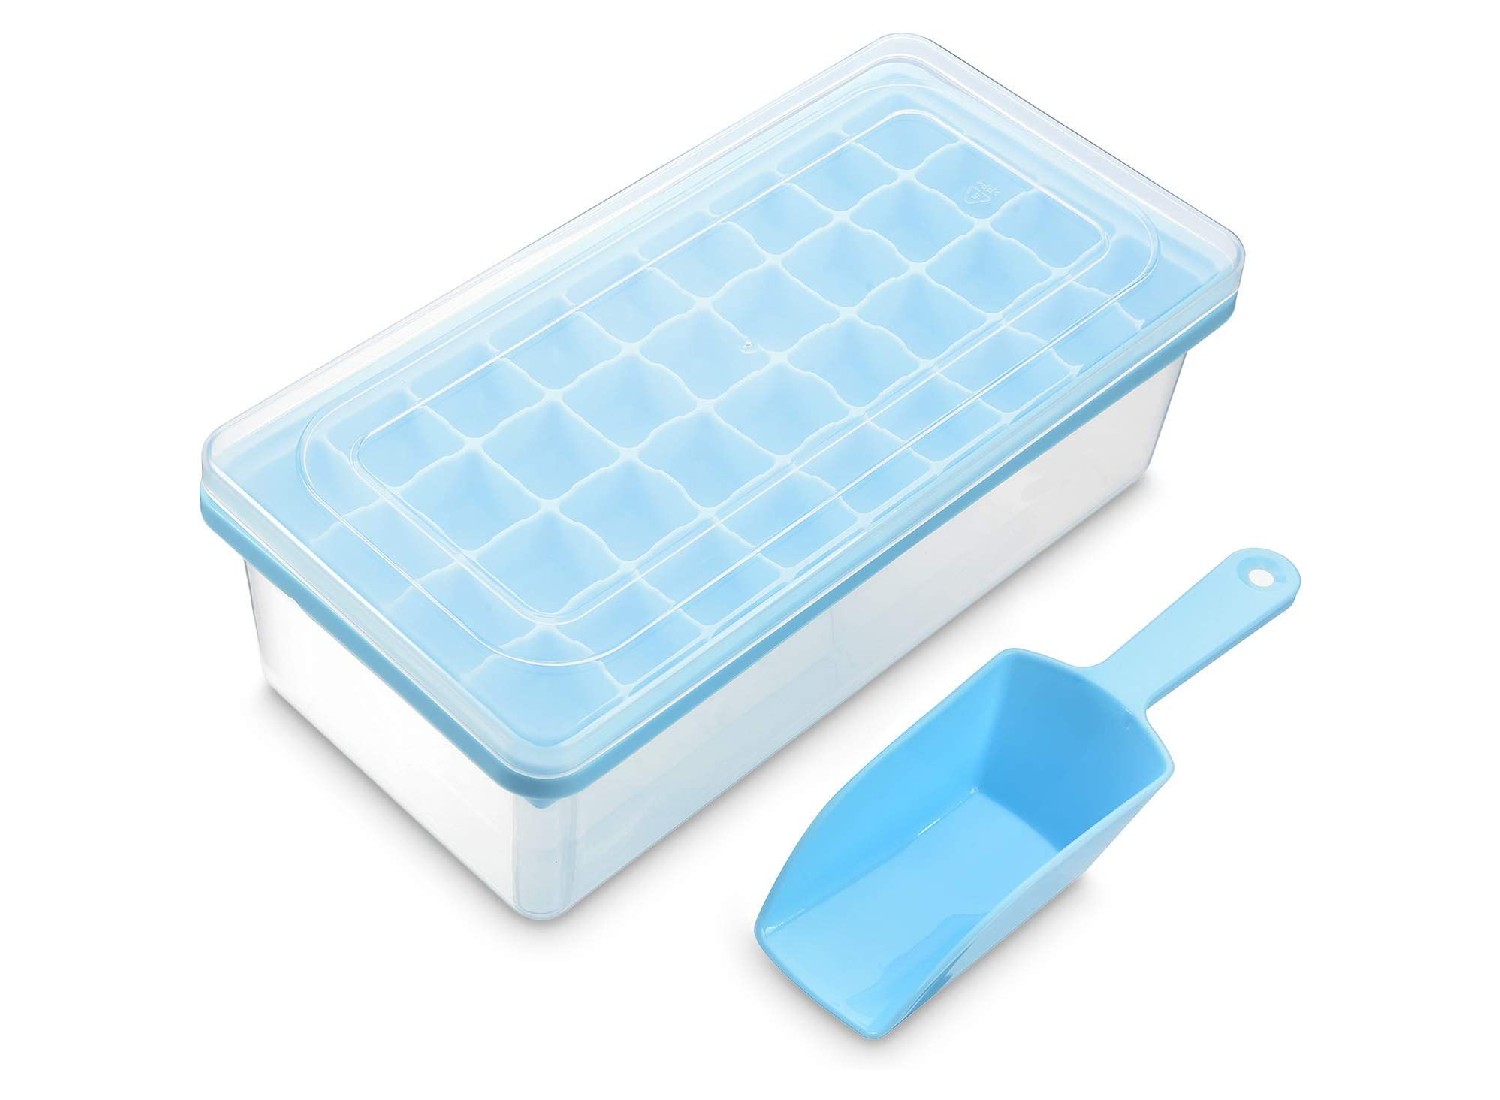 Yoove Silicone Ice Cube Tray